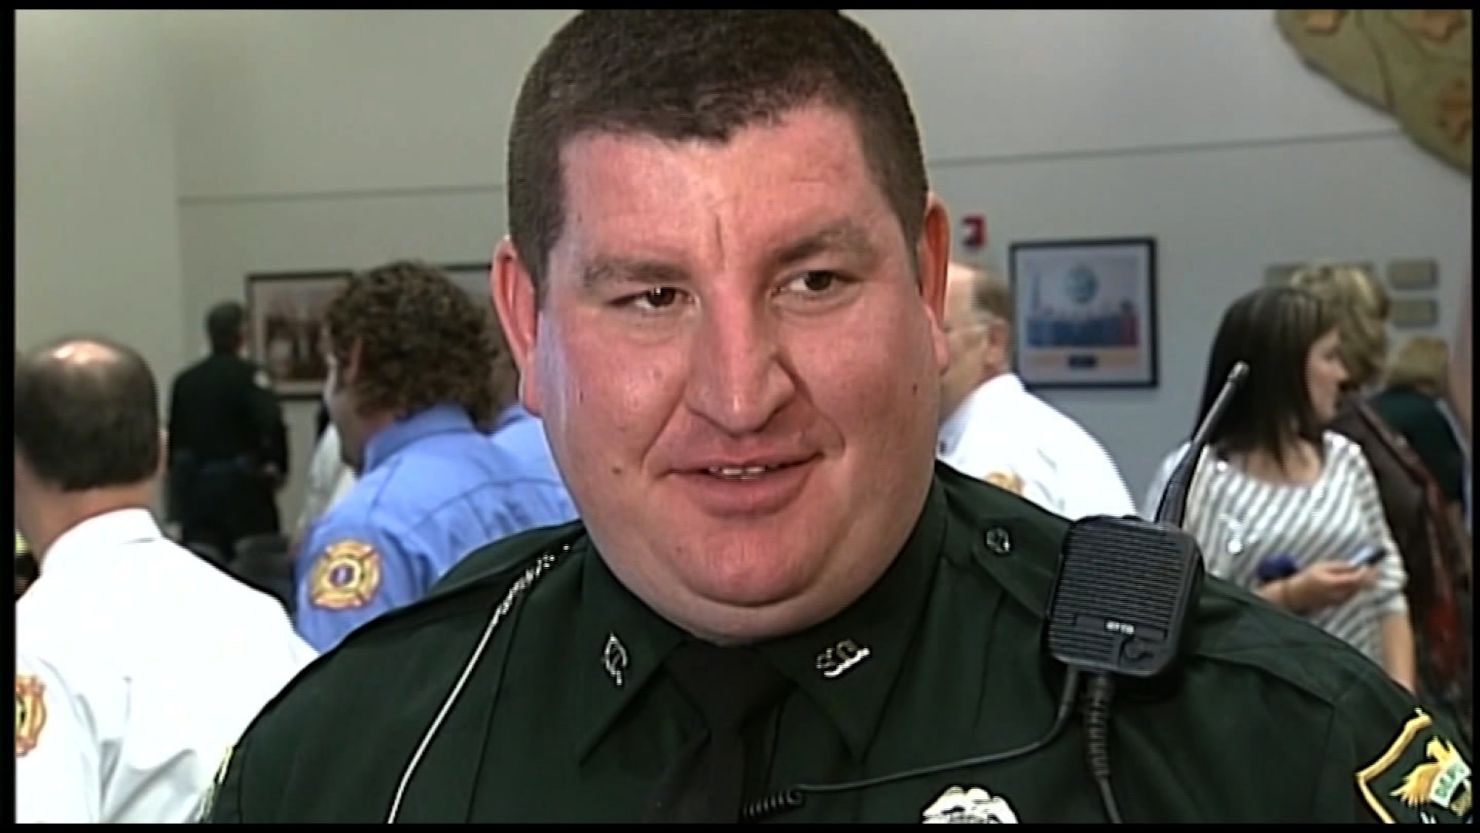 Deputy John Braman resigned on Monday amid allegations that he stole money from "multiple" DUI suspects.